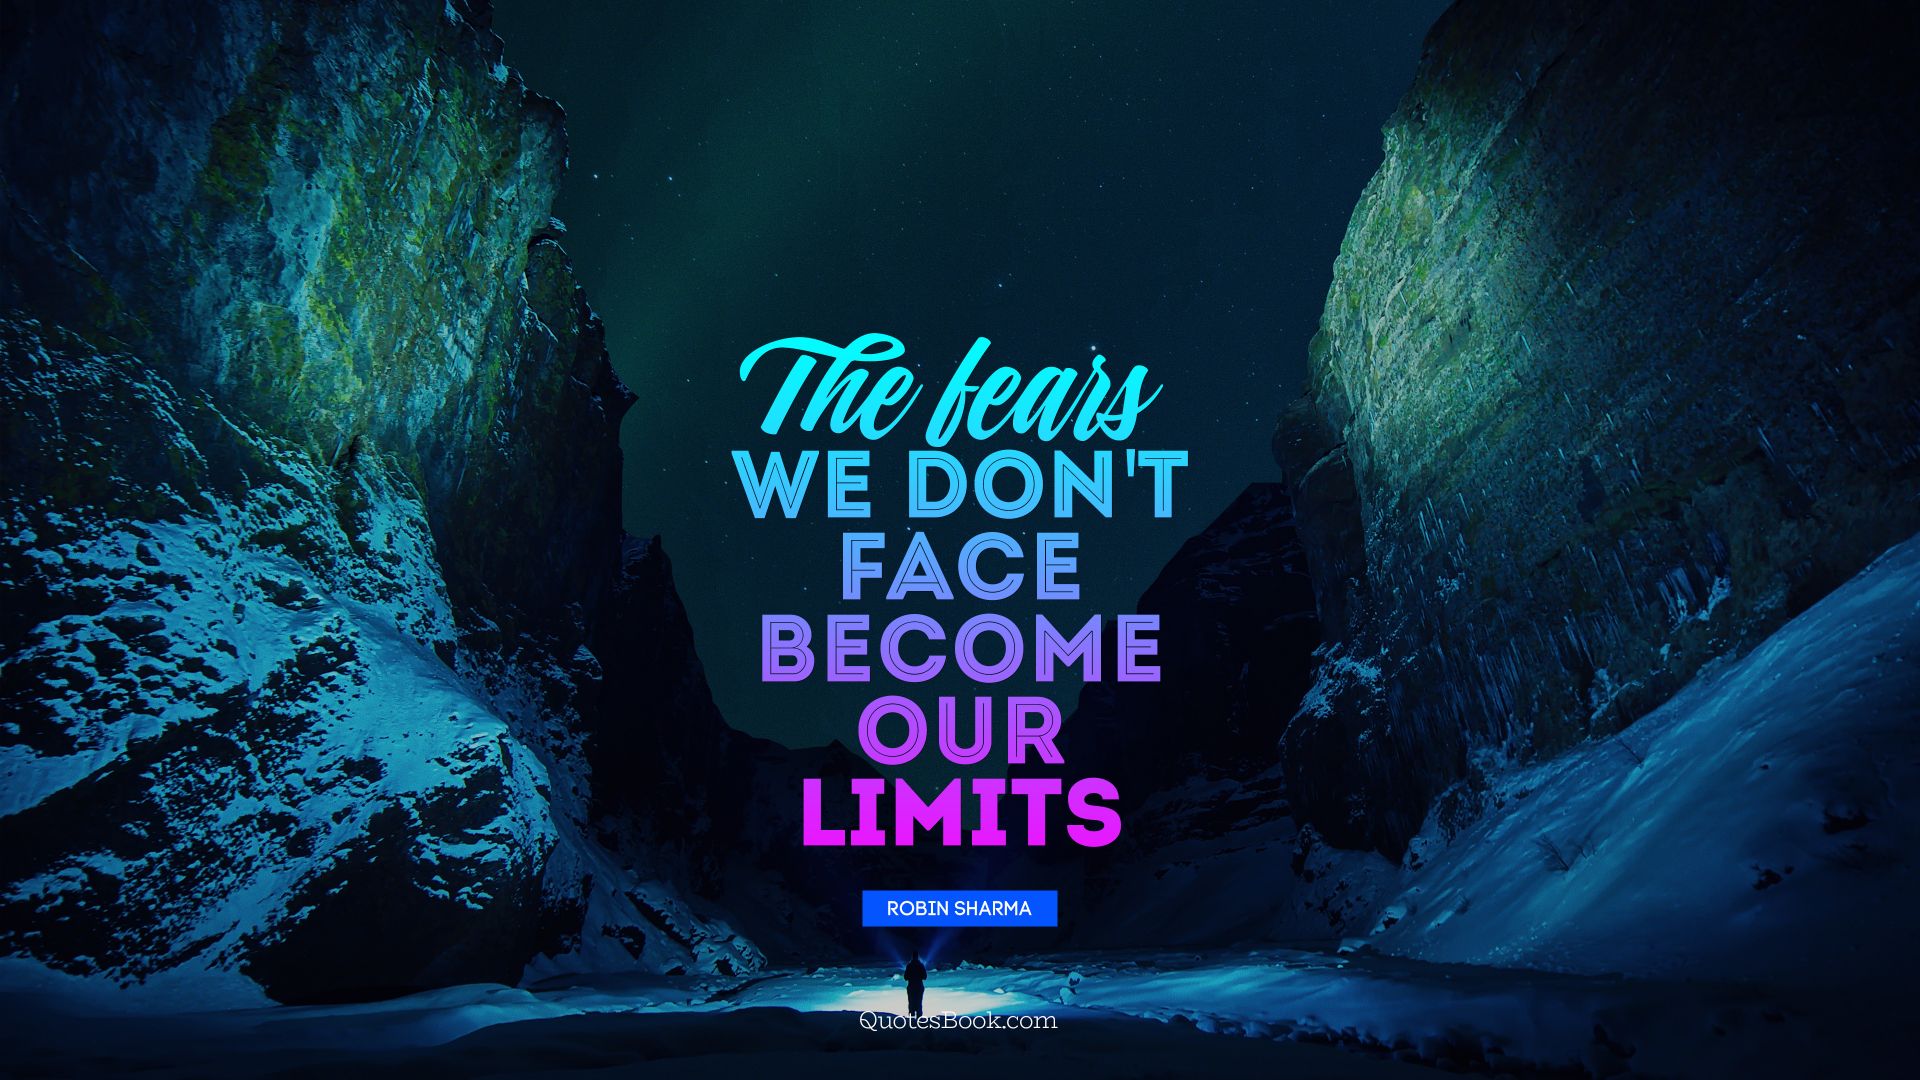 The fears we don't face become our limits. - Quote by Robin Sharma